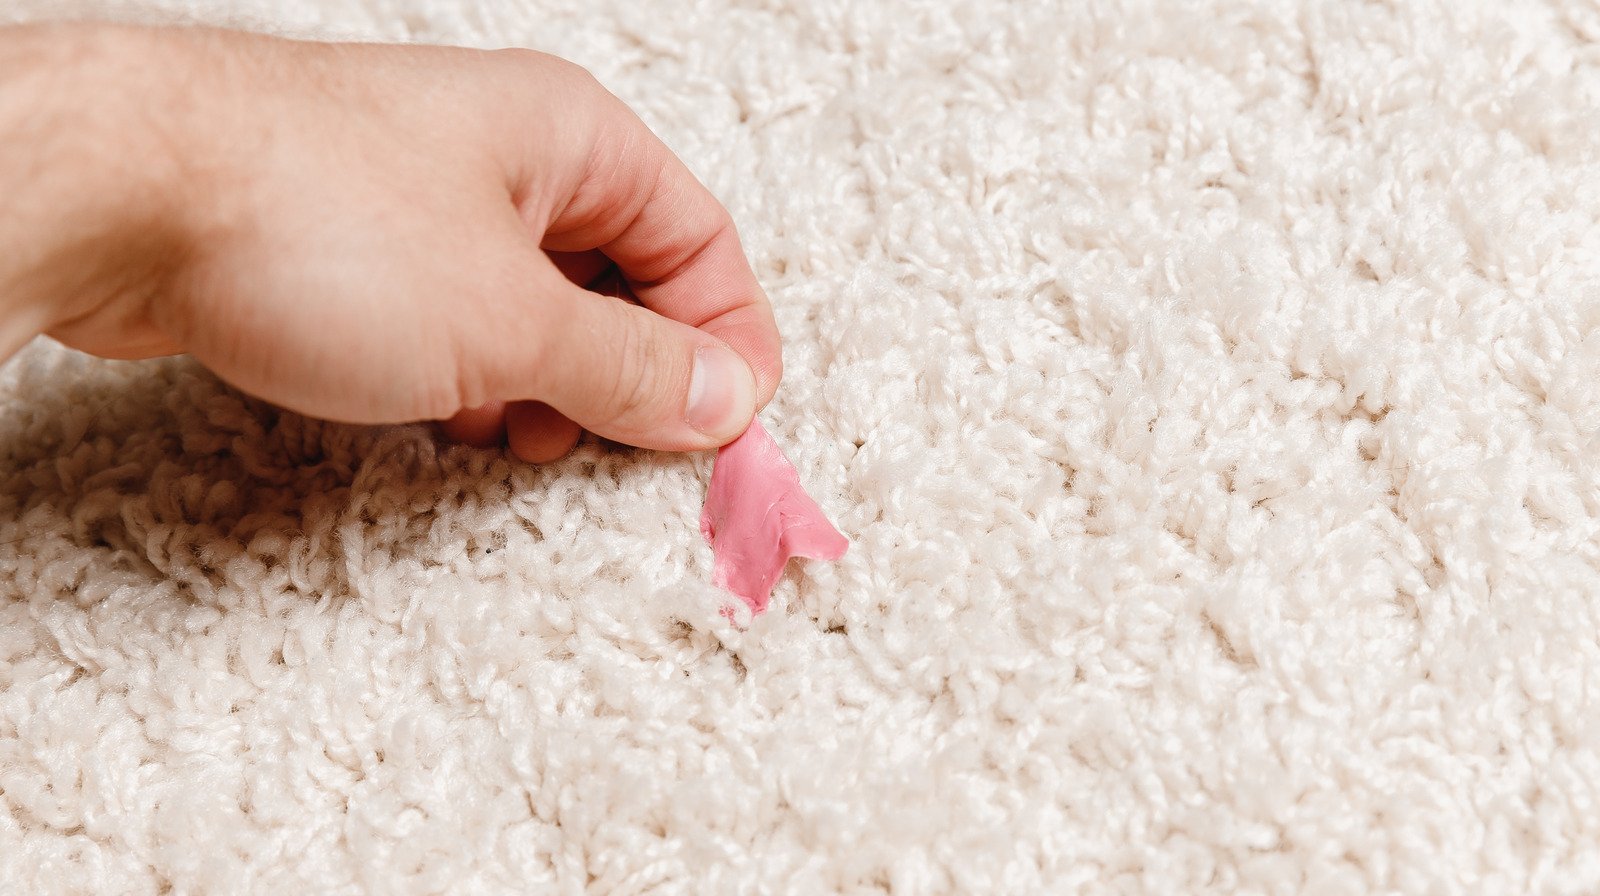 What To Do If You End Up With Gum In Your Carpet